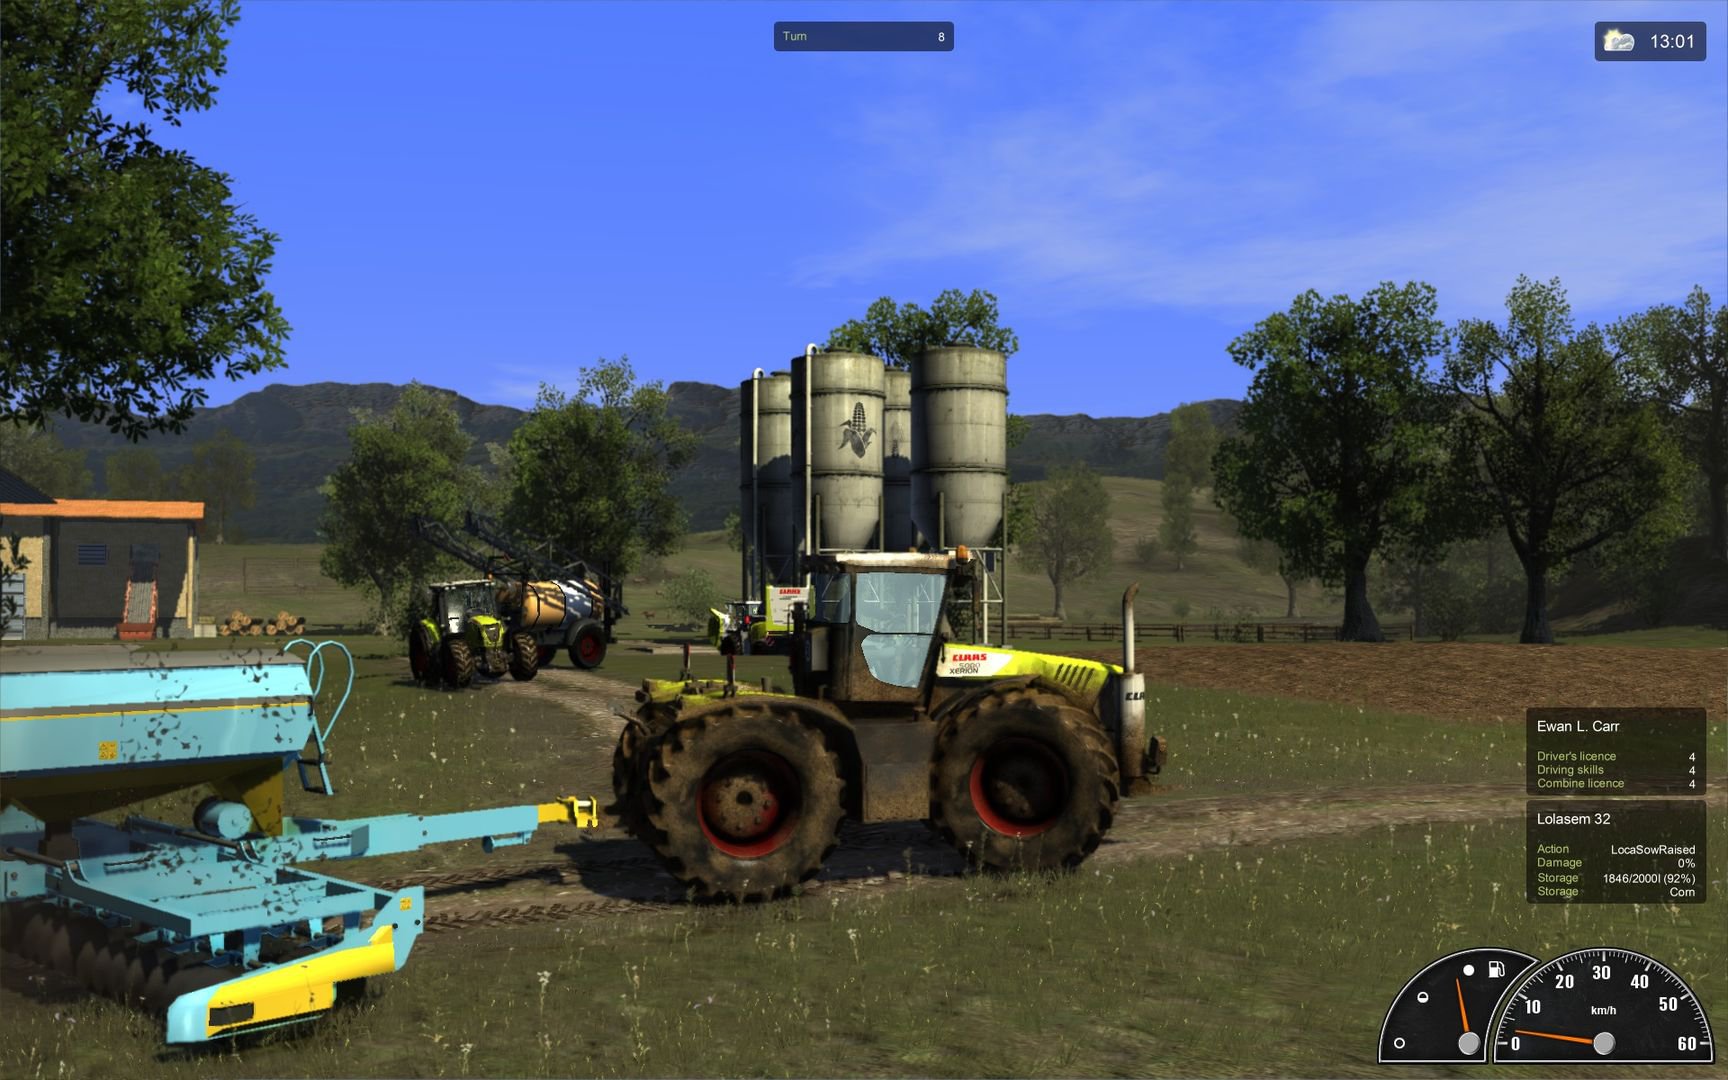 Agricultural Simulator 2011 Extended Edition 6